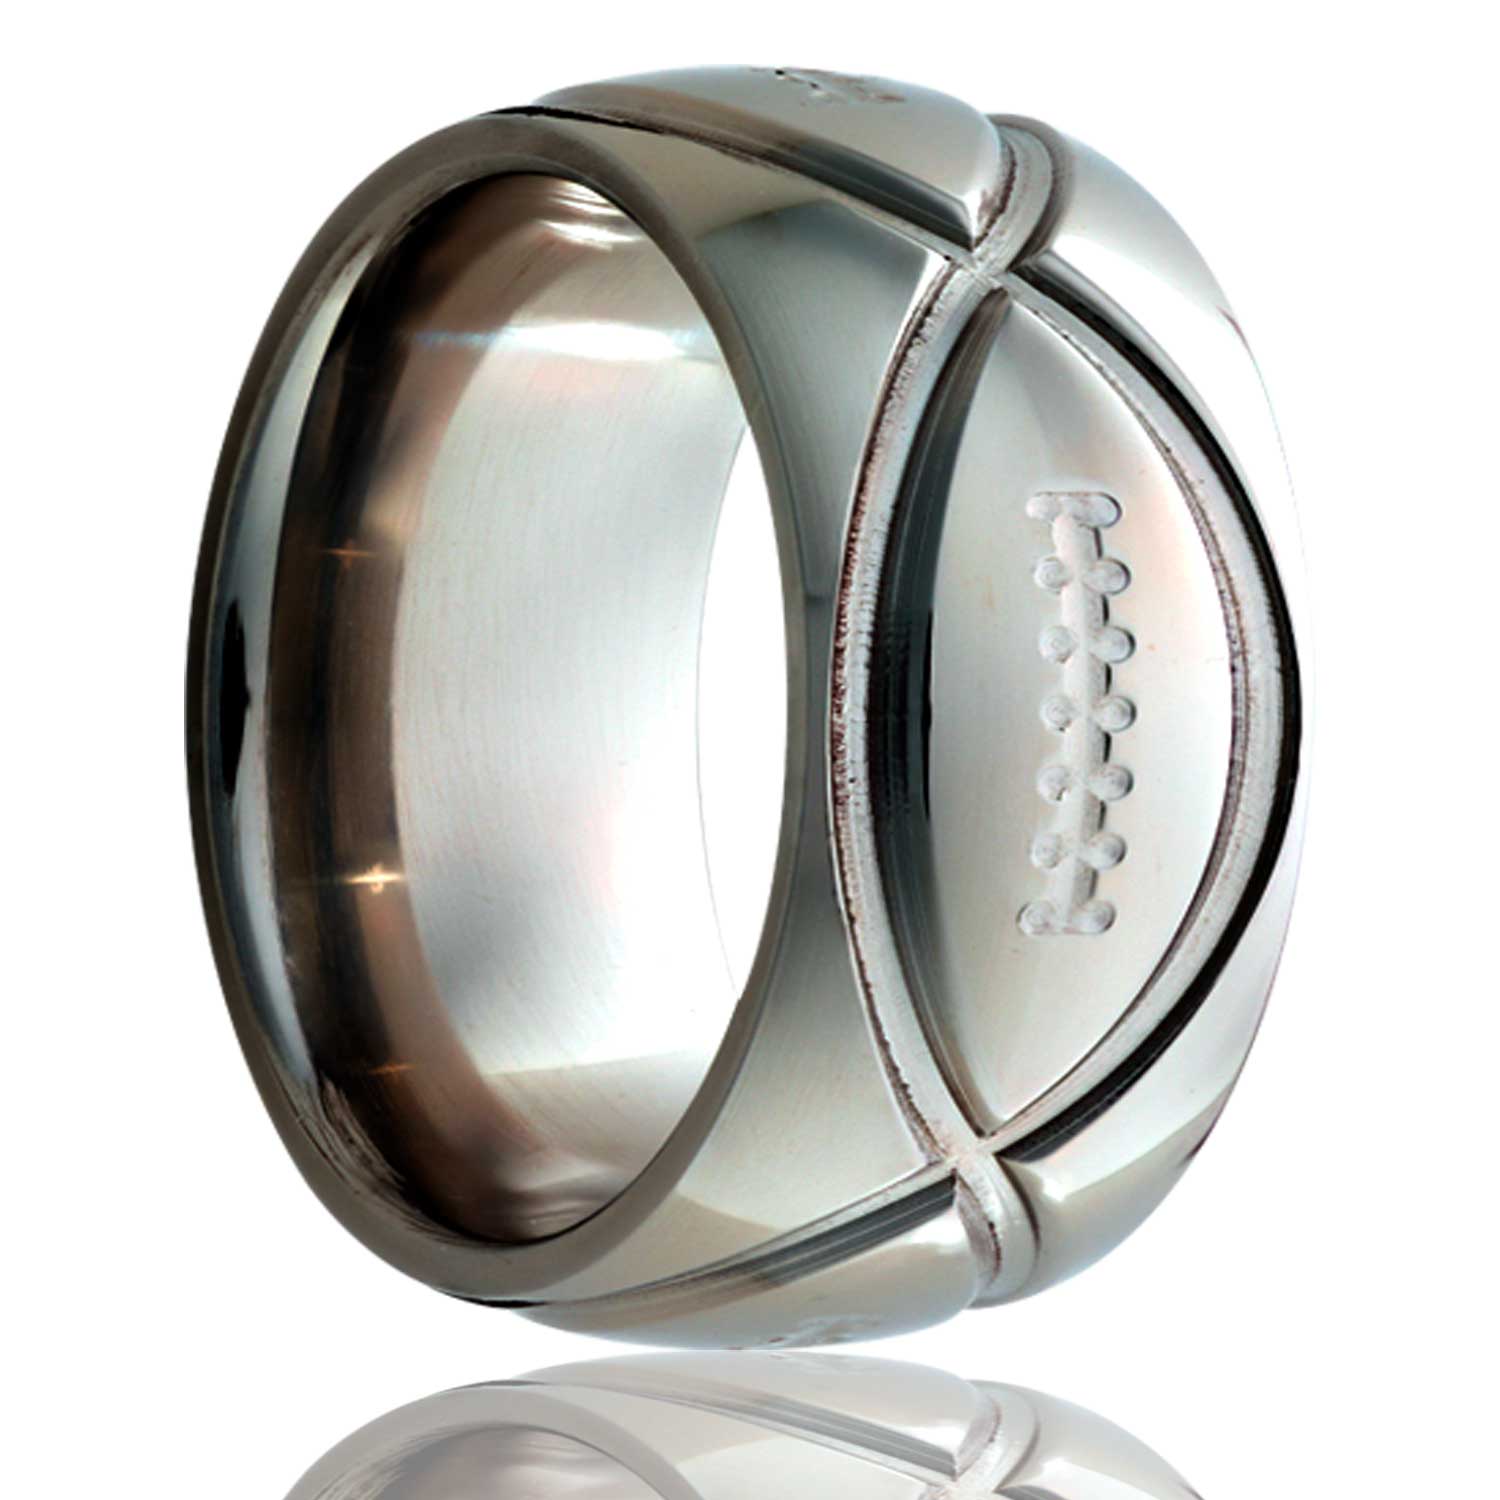 A football pattern domed titanium wedding band displayed on a neutral white background.